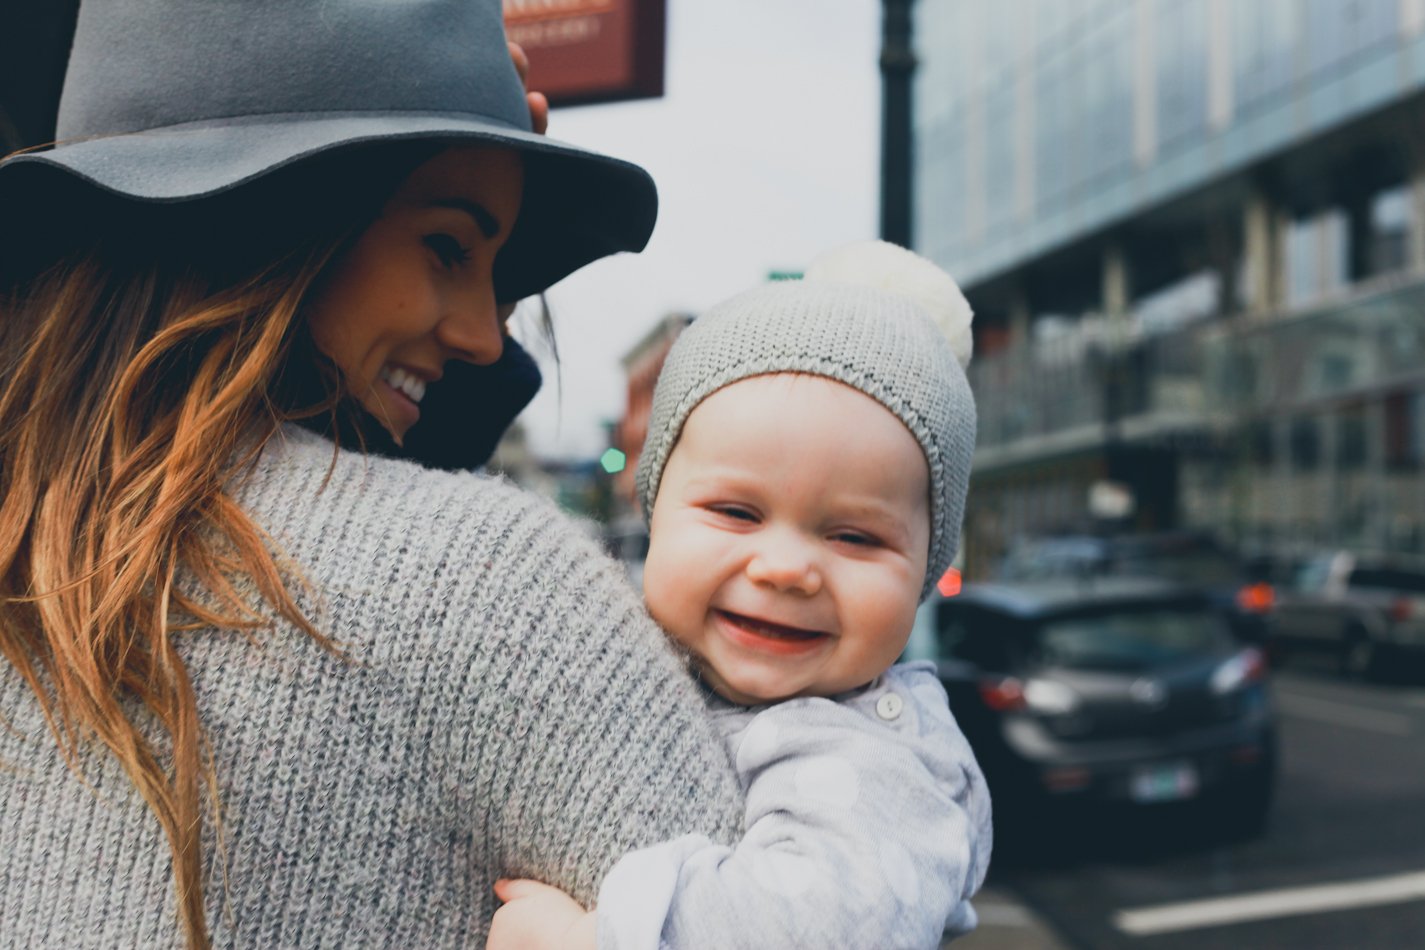 An Open Letter To My Future Daughter On How Full of Worth She Is